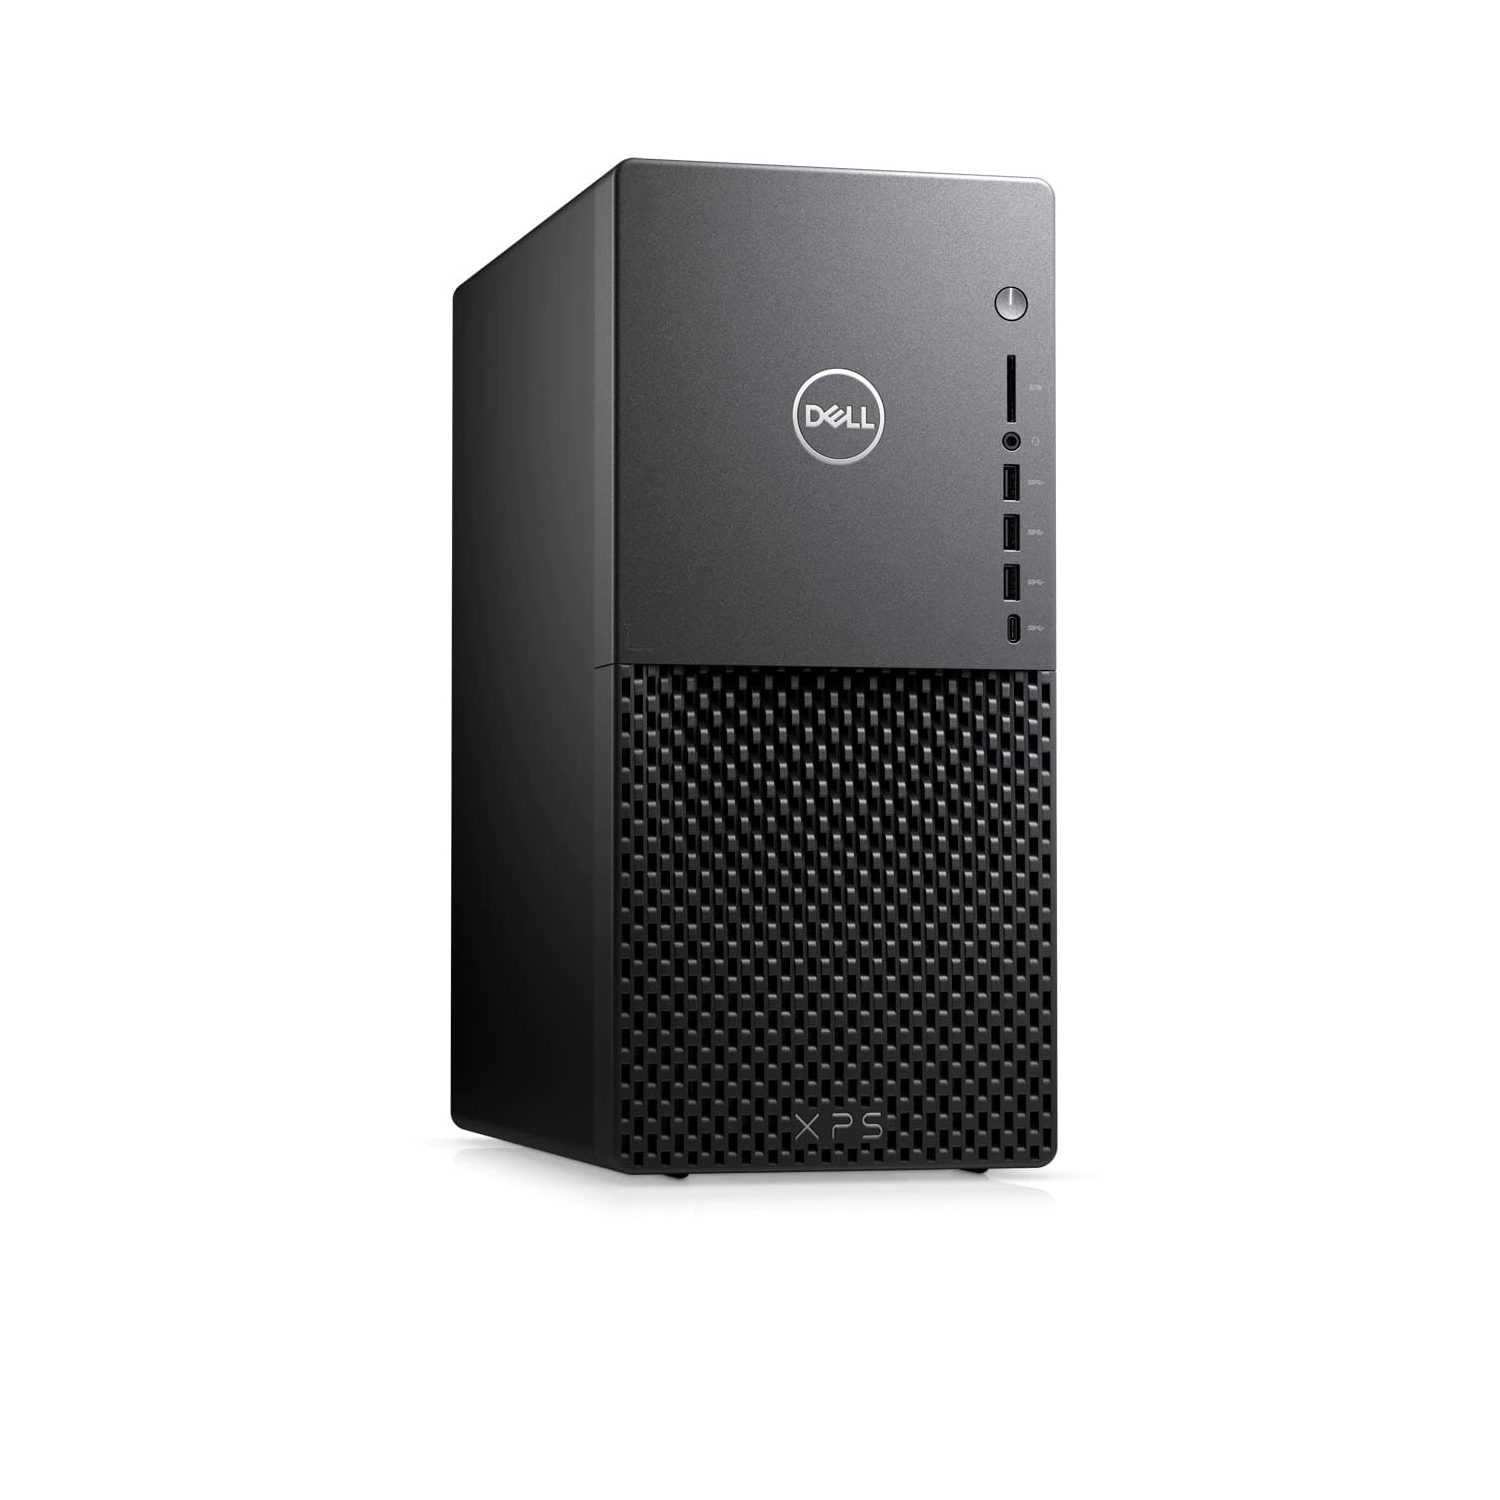 Refurbished (Excellent) - Dell XPS 8940 Desktop (2020) | Core i7 - 256GB SSD - 8GB RAM - RTX 3060 | 8 Cores @ 4.9 GHz - 11th Gen CPU Certified Refurbished